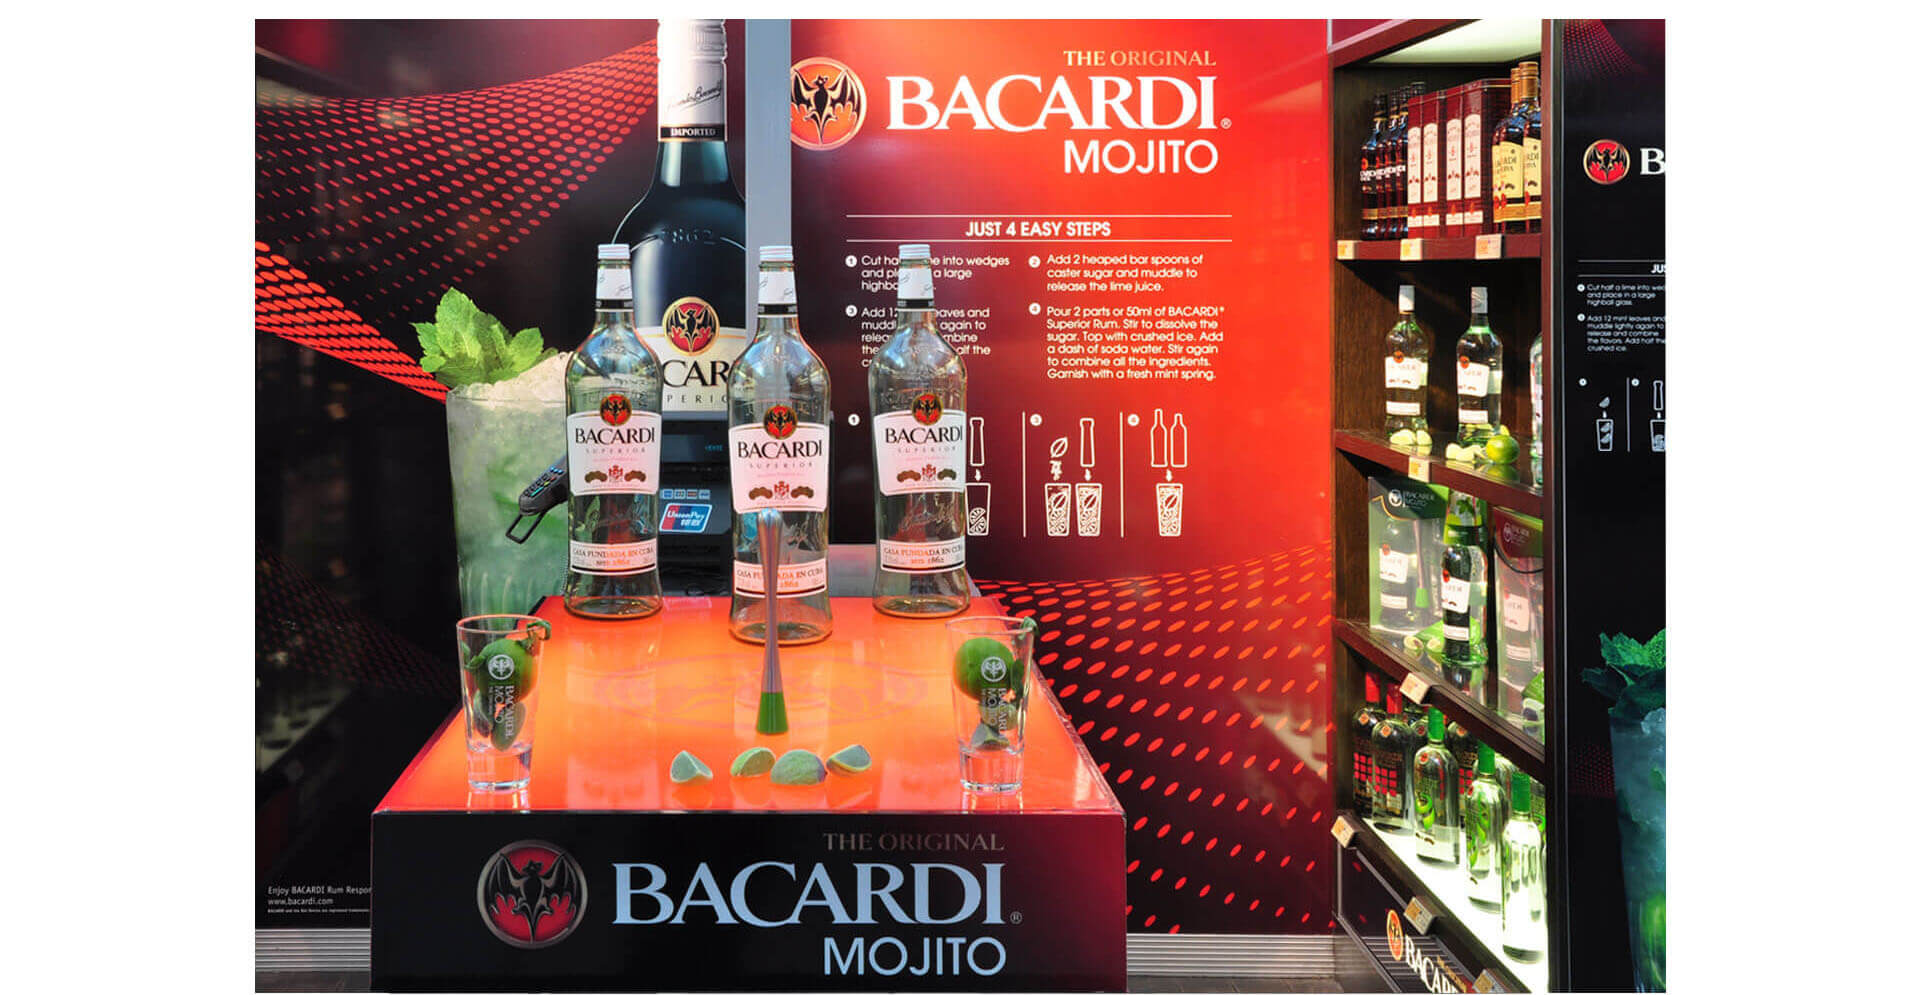 Bacardi Mojito Global Travel Retail, brand activation store interior design and branding at Charles de Gualle Airport